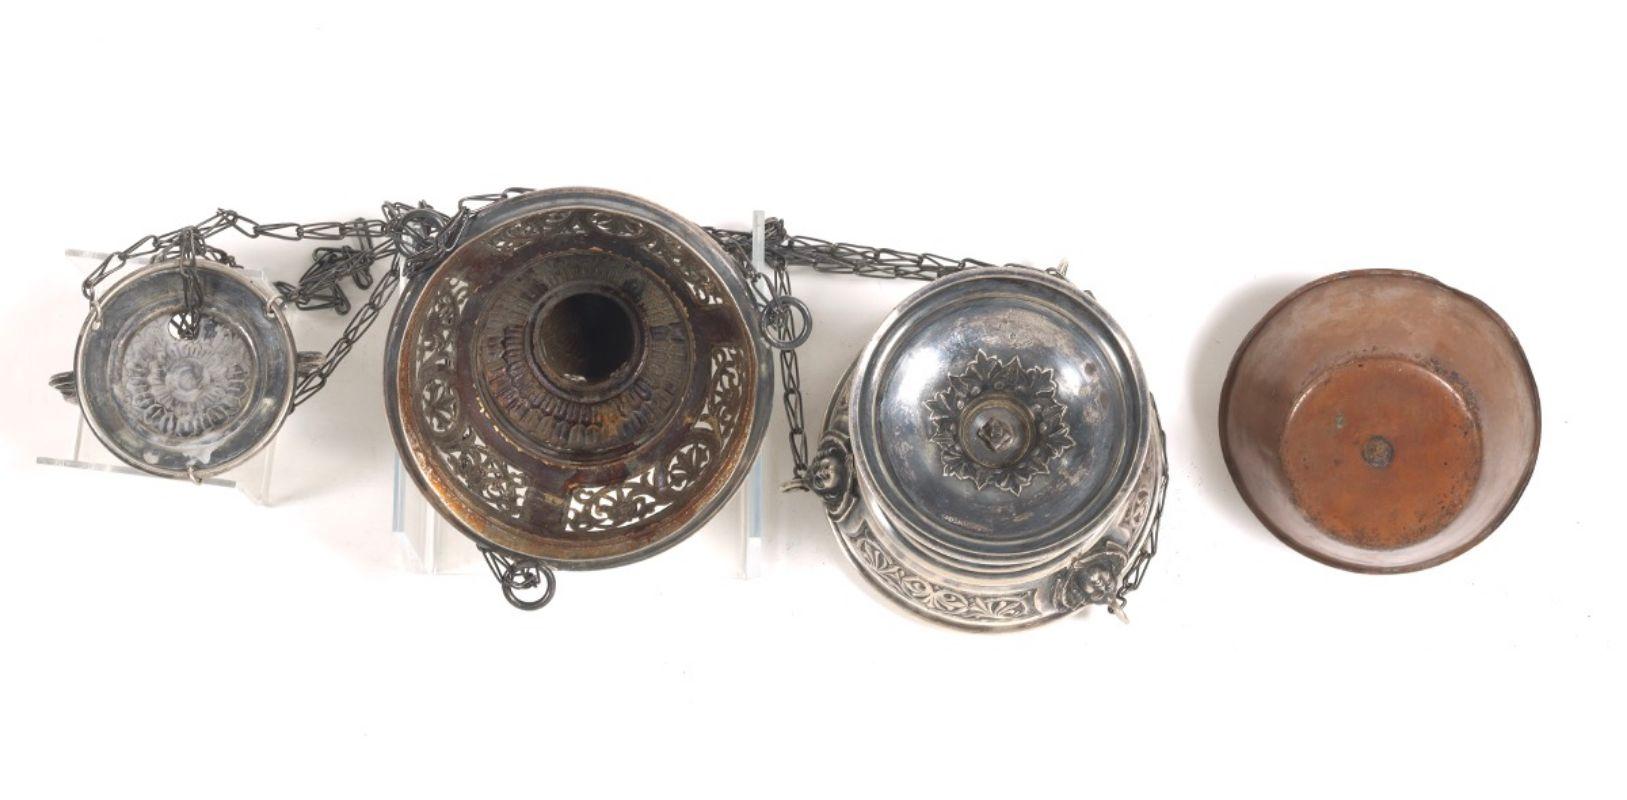 19th Century Rare German Silver Incense Burner Lamp, by Wilh. Rauscher, Pope's Court Jeweler